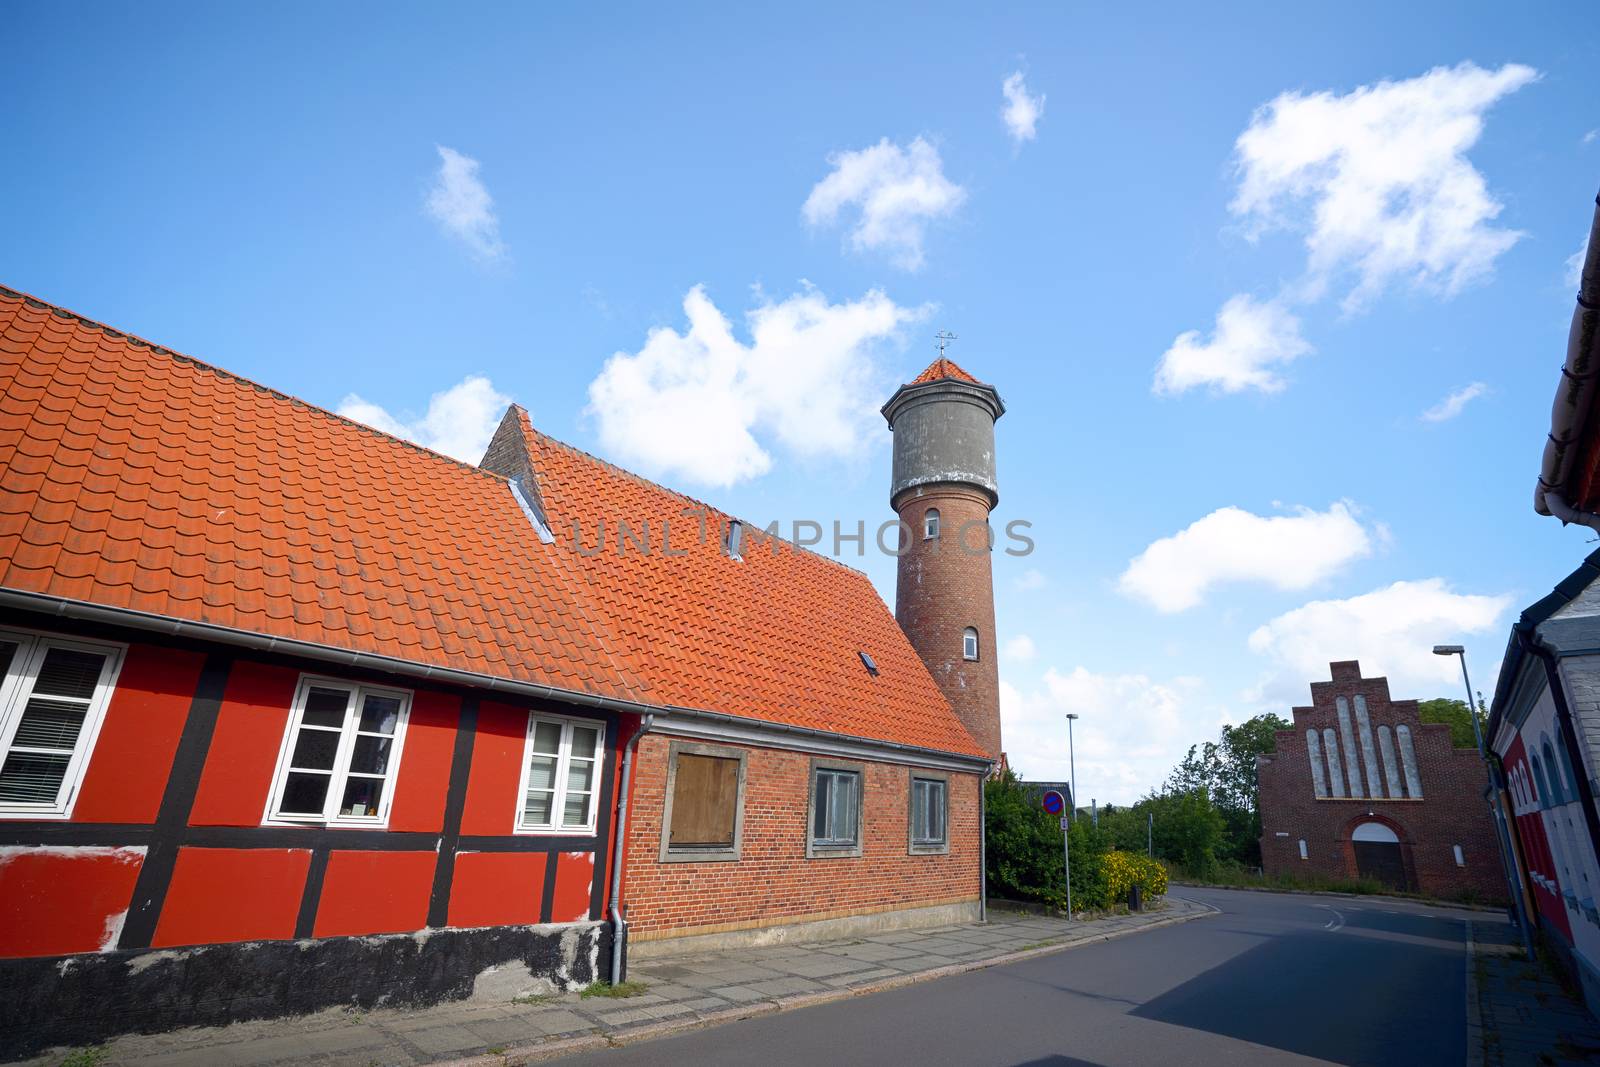 City street with a tower in a small village in Denmark under a blue sky